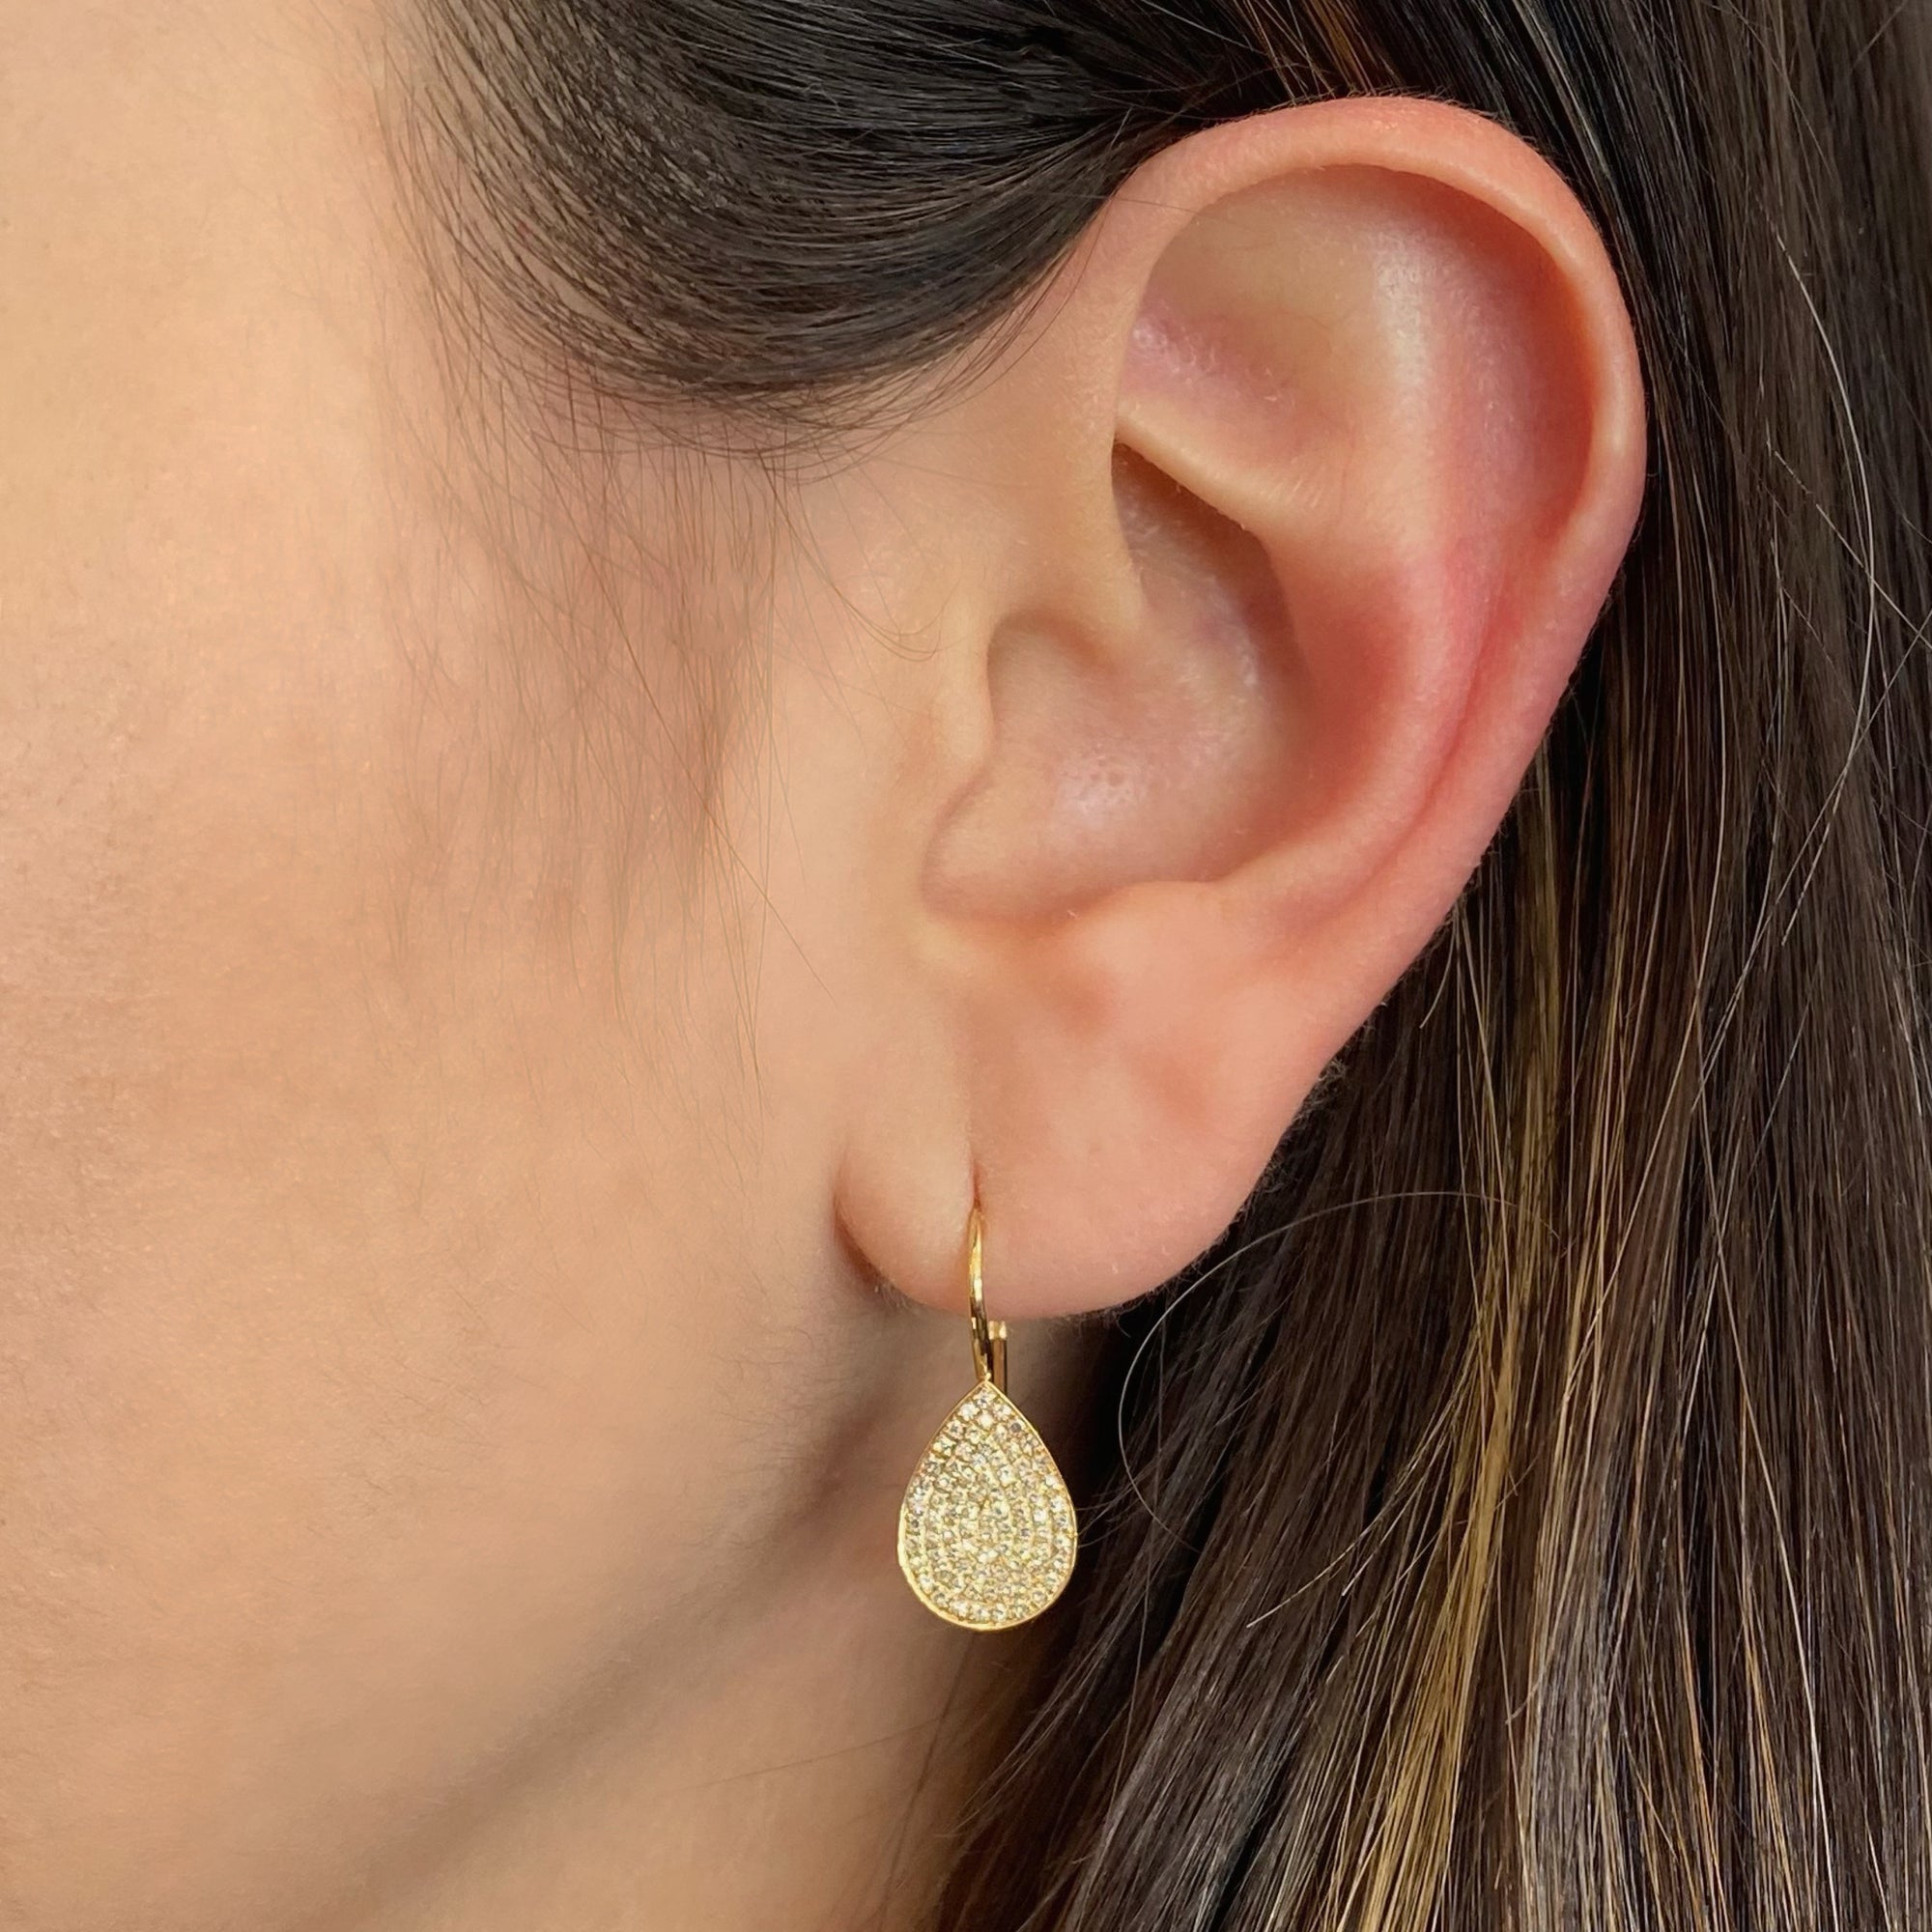 Pave Diamond Teardrop Lever-Back Earrings  - 14K gold weighing 2.09 grams  - 160 round diamonds totaling 0.42 carats